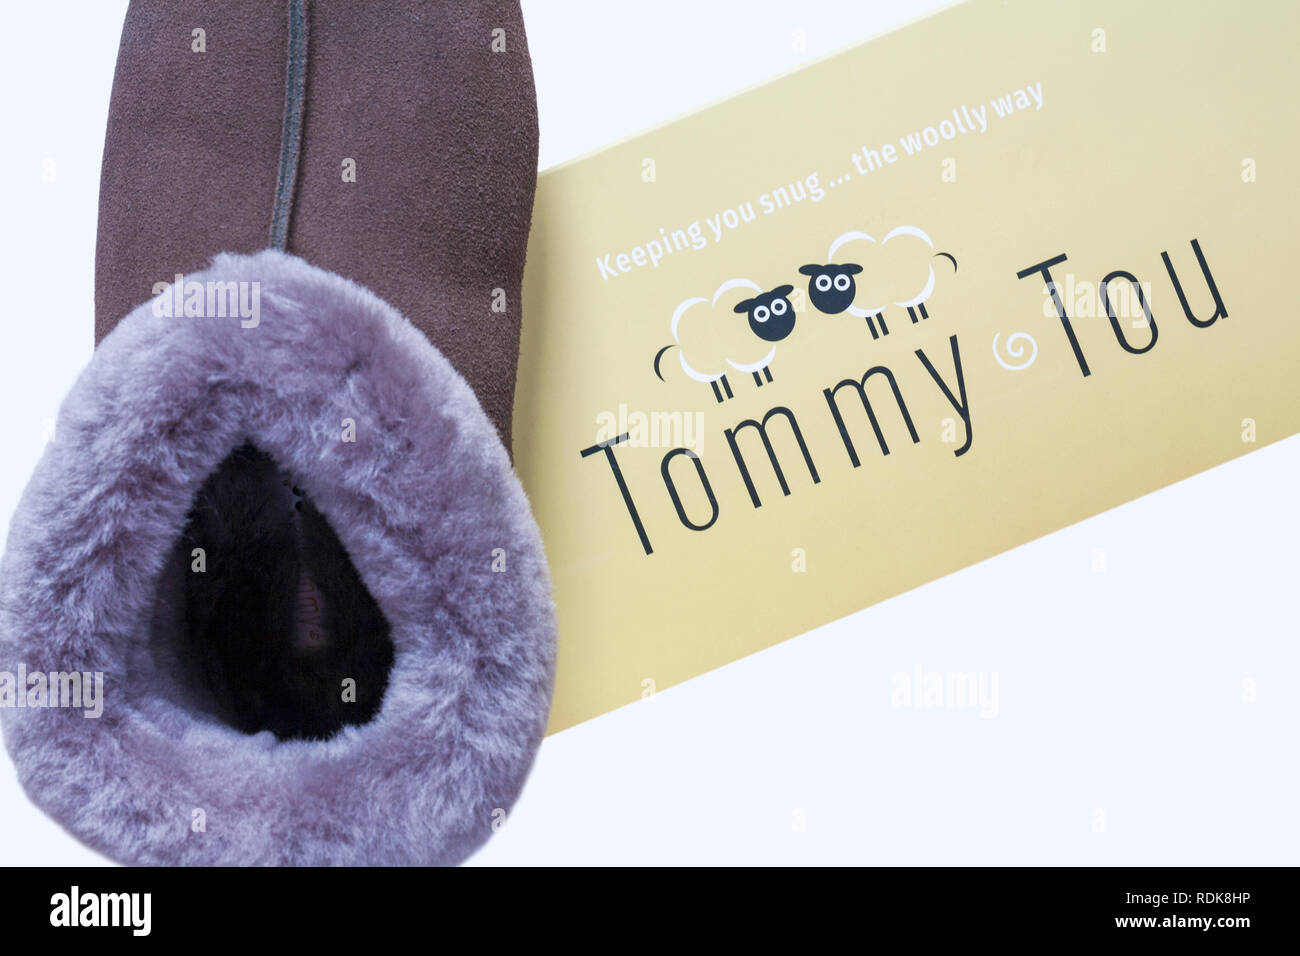 tommy tou slippers